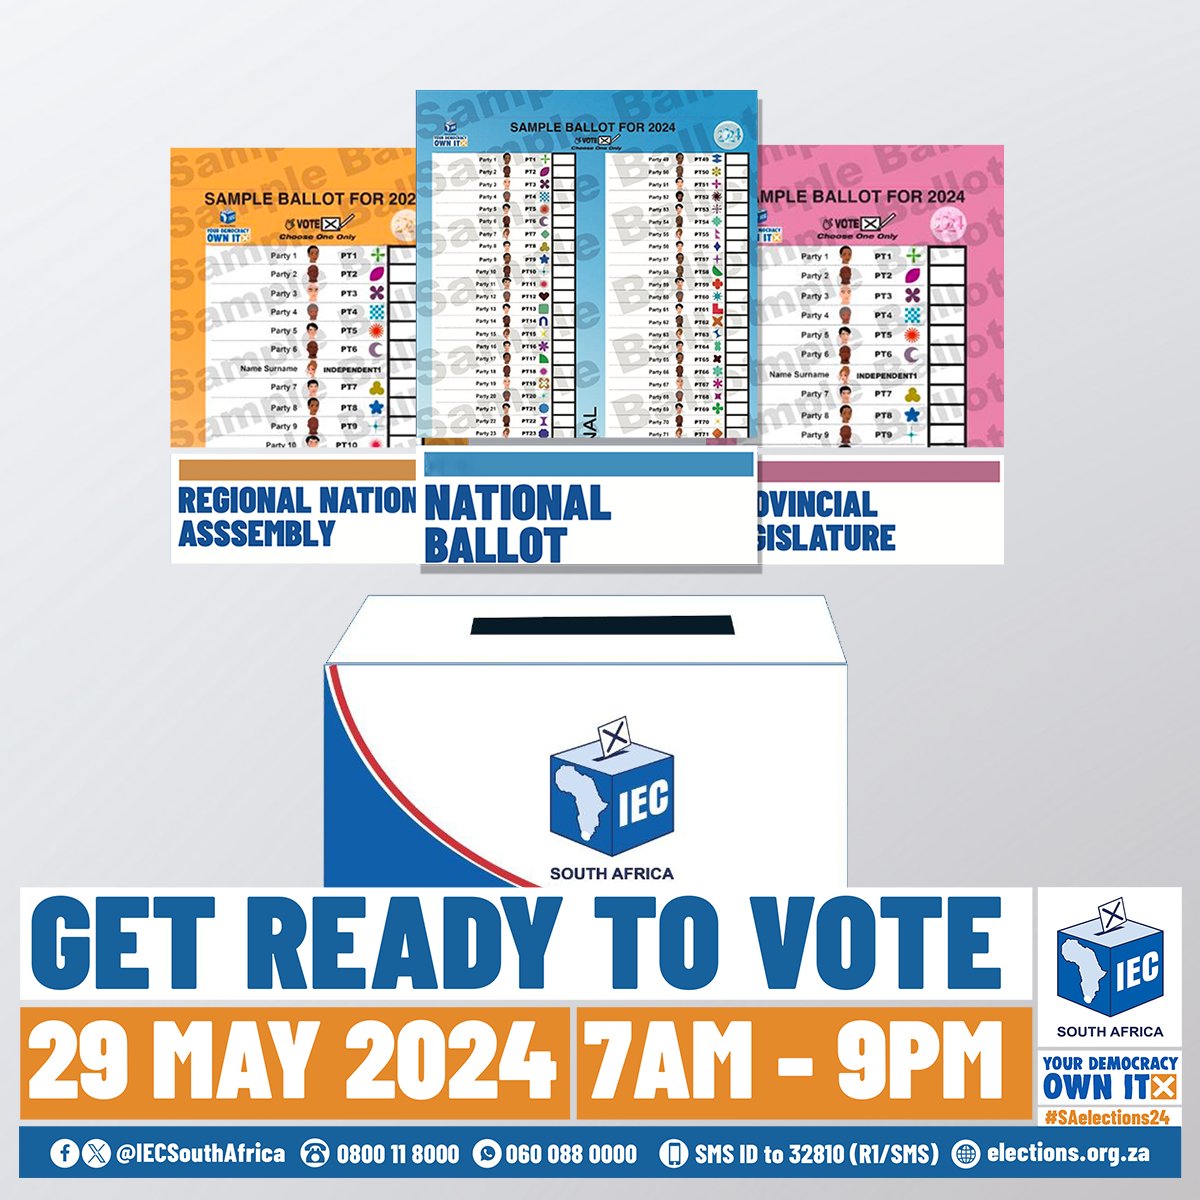 💡Remember, for #SAelections24, you'll be voting on three ballots if you're in your registered province. Familiarise yourself with the ballots, and remember—one ballot, one mark. Be sure to vote where you're registered! #KnowYourBallots

Find out more: bit.ly/4aUxlo2